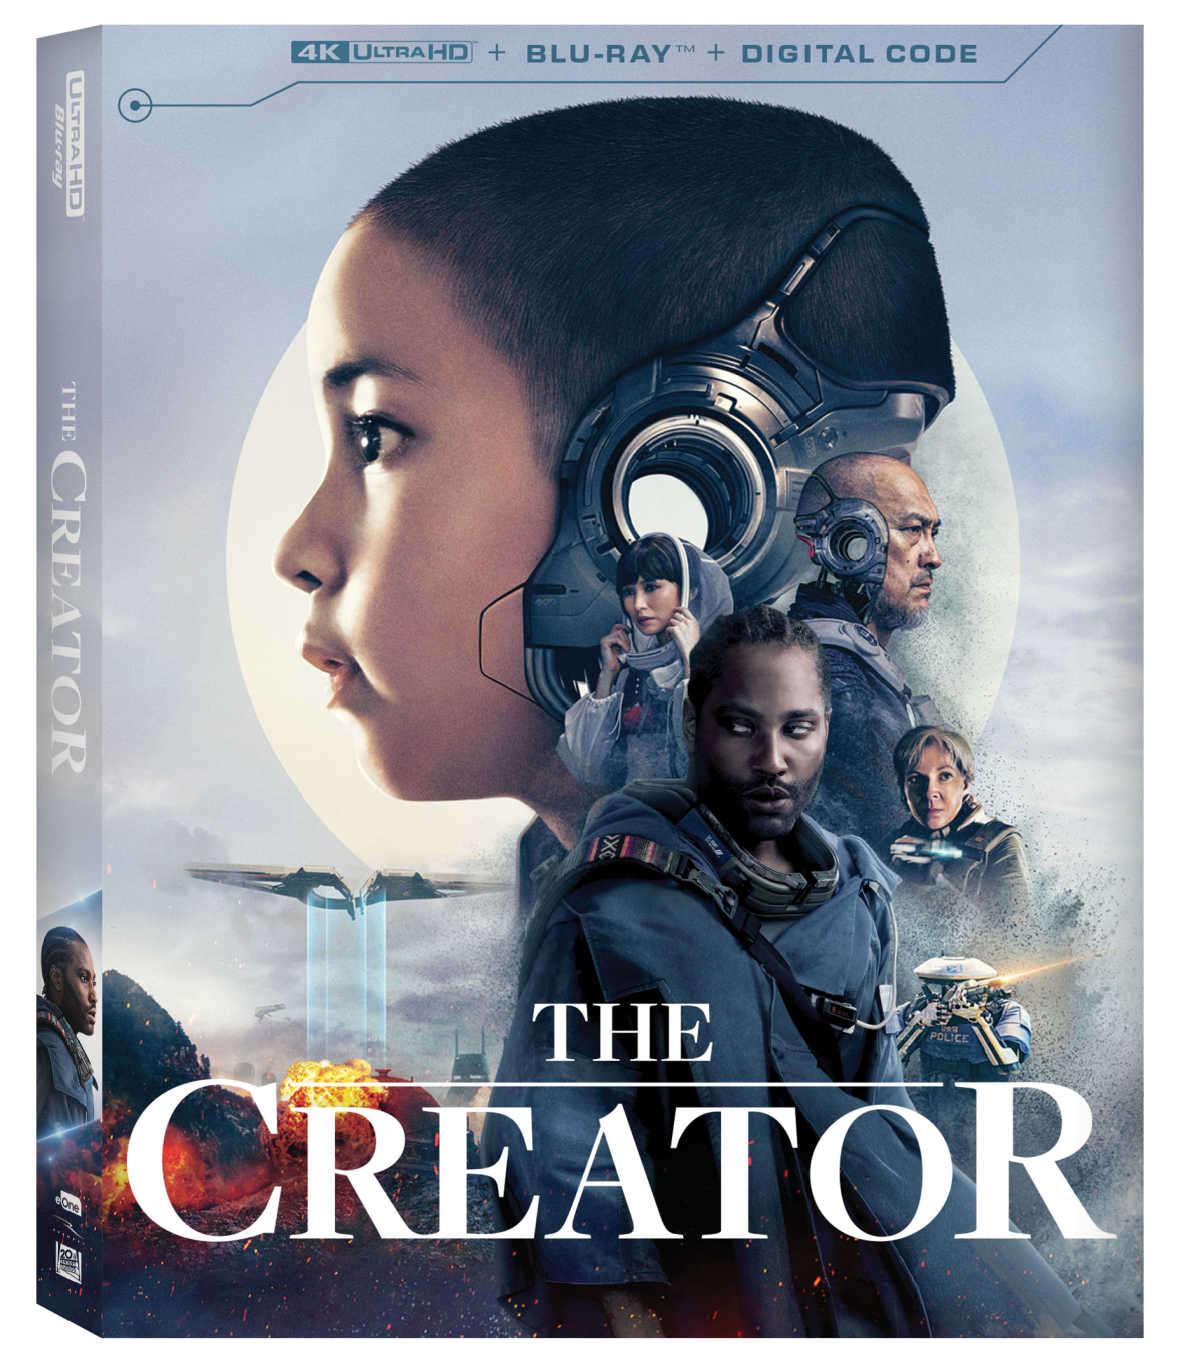 Embark on a mind-bending journey with The Creator, a captivating sci-fi thriller that will challenge your perceptions and leave you questioning everything.